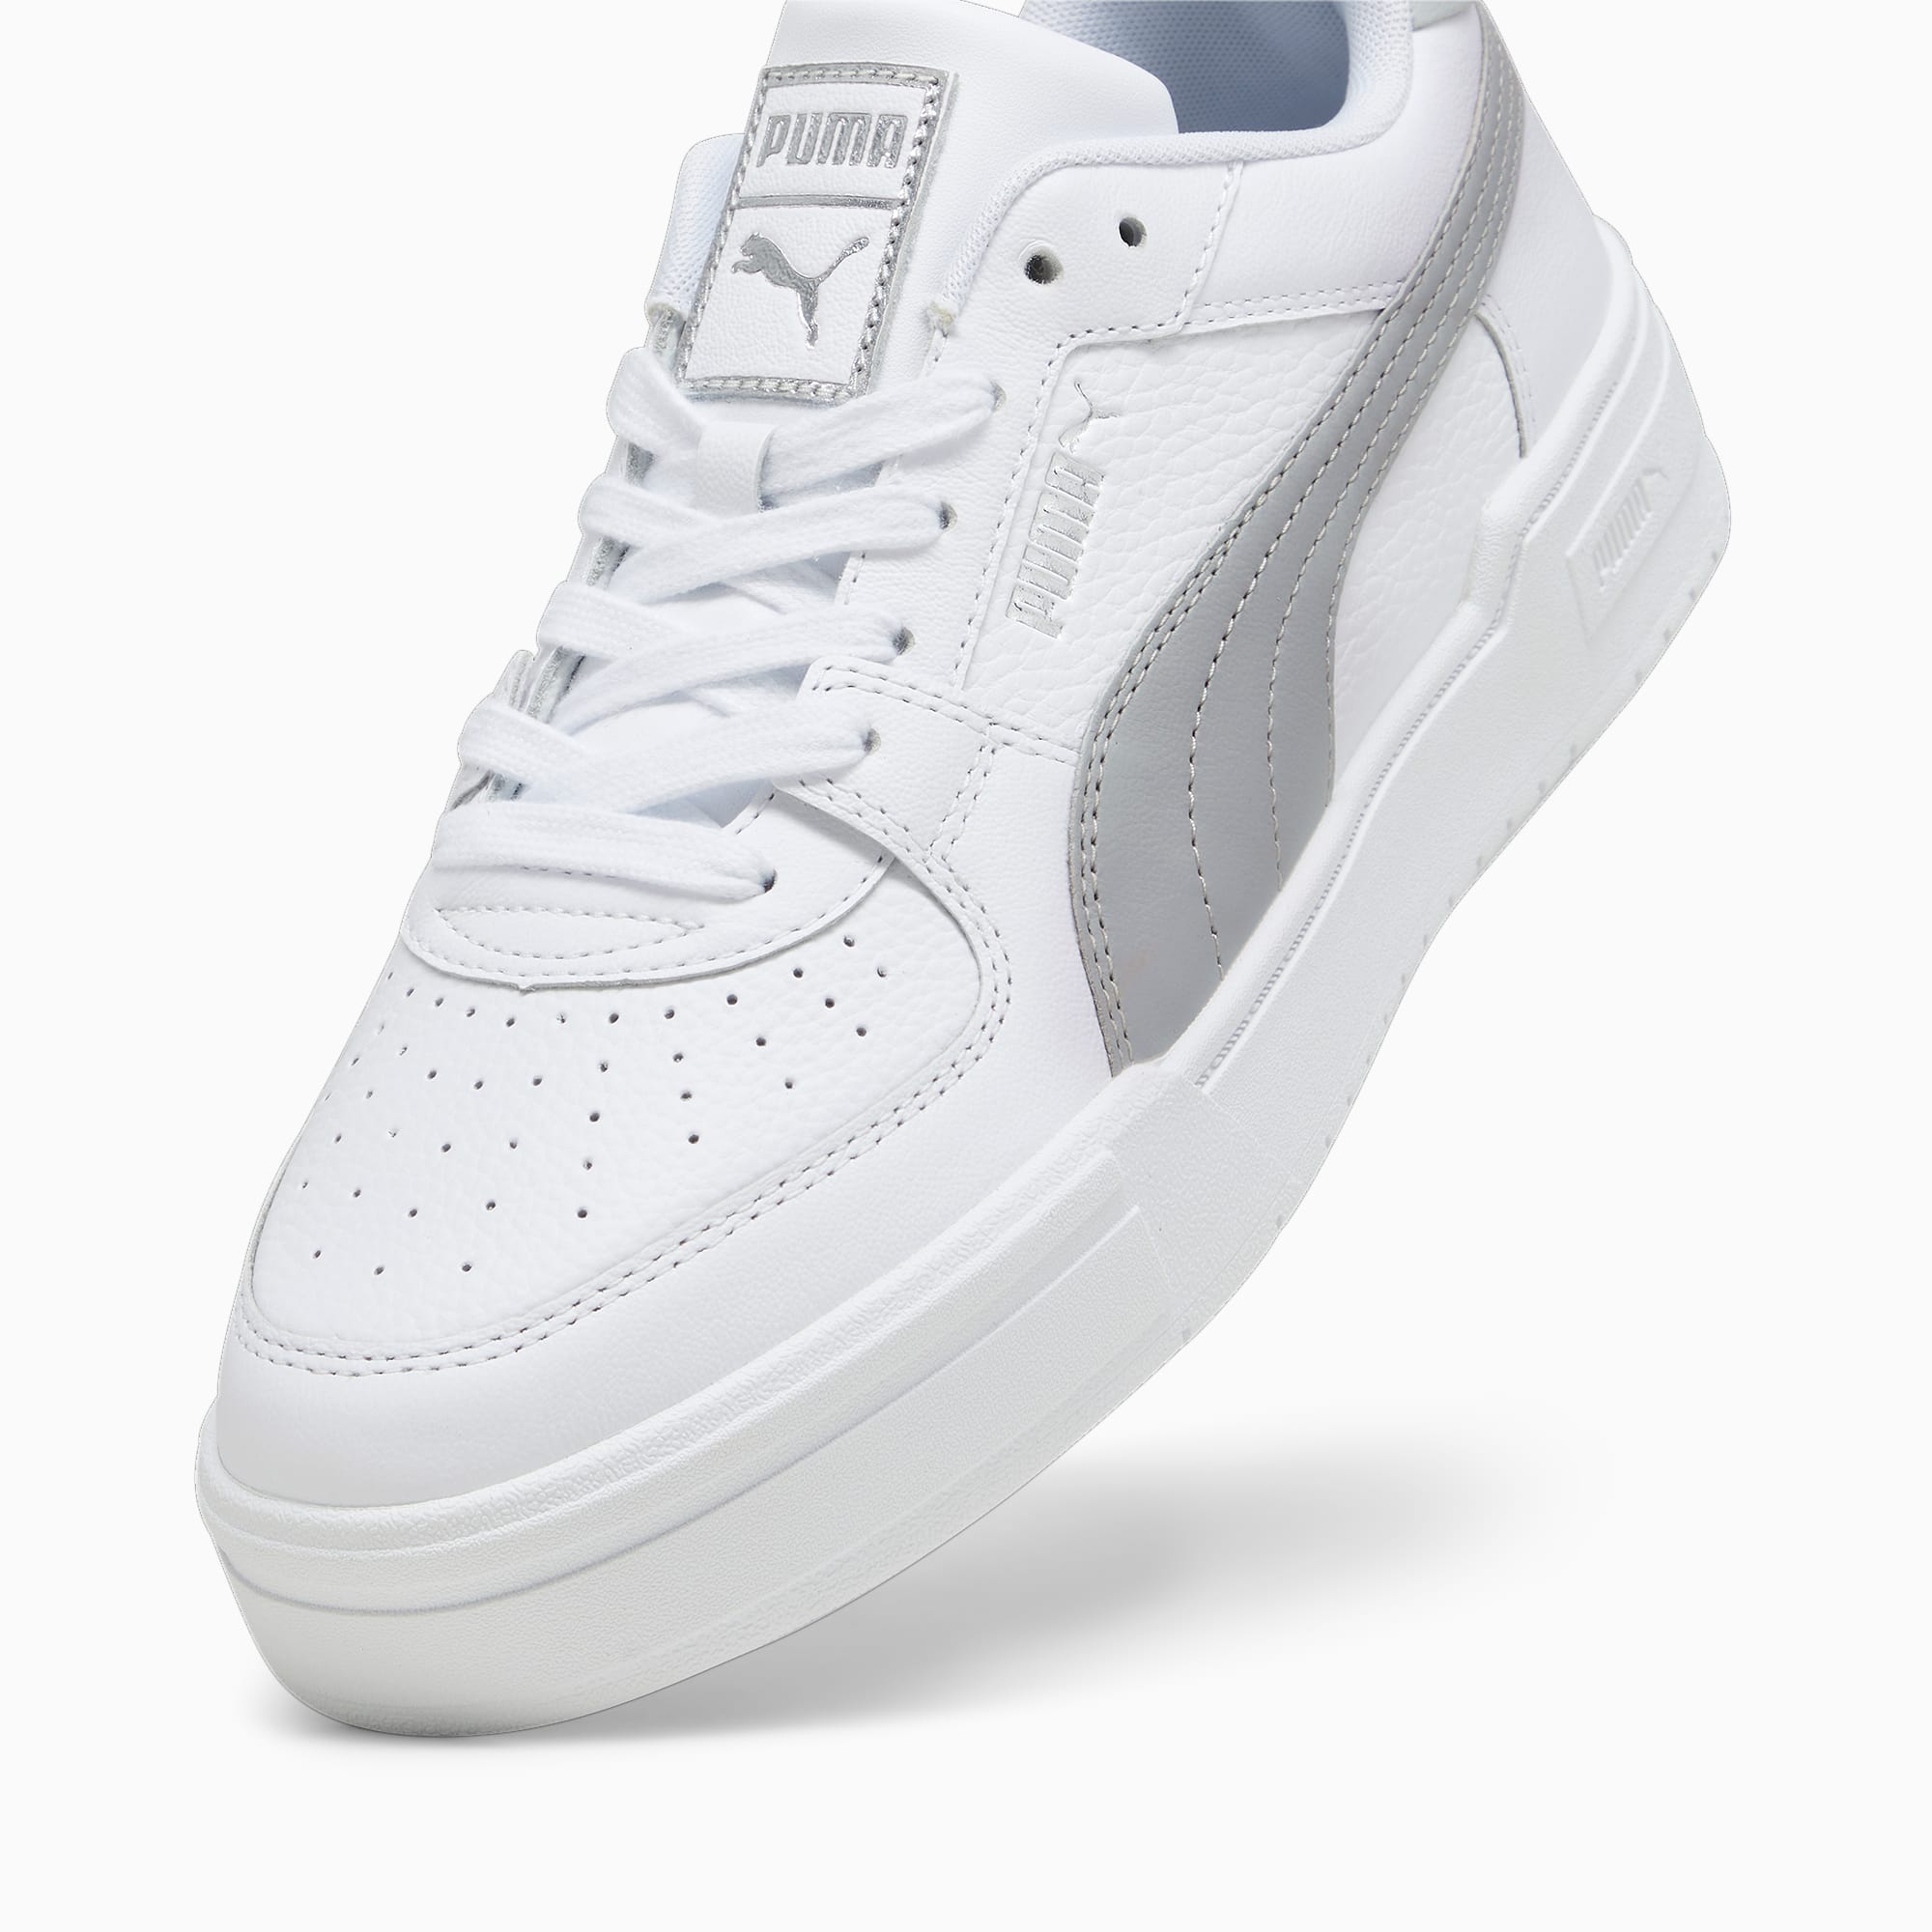 Women's PUMA Ca Pro Classic Trainers, White/Cool Light Grey, Size 47, Shoes